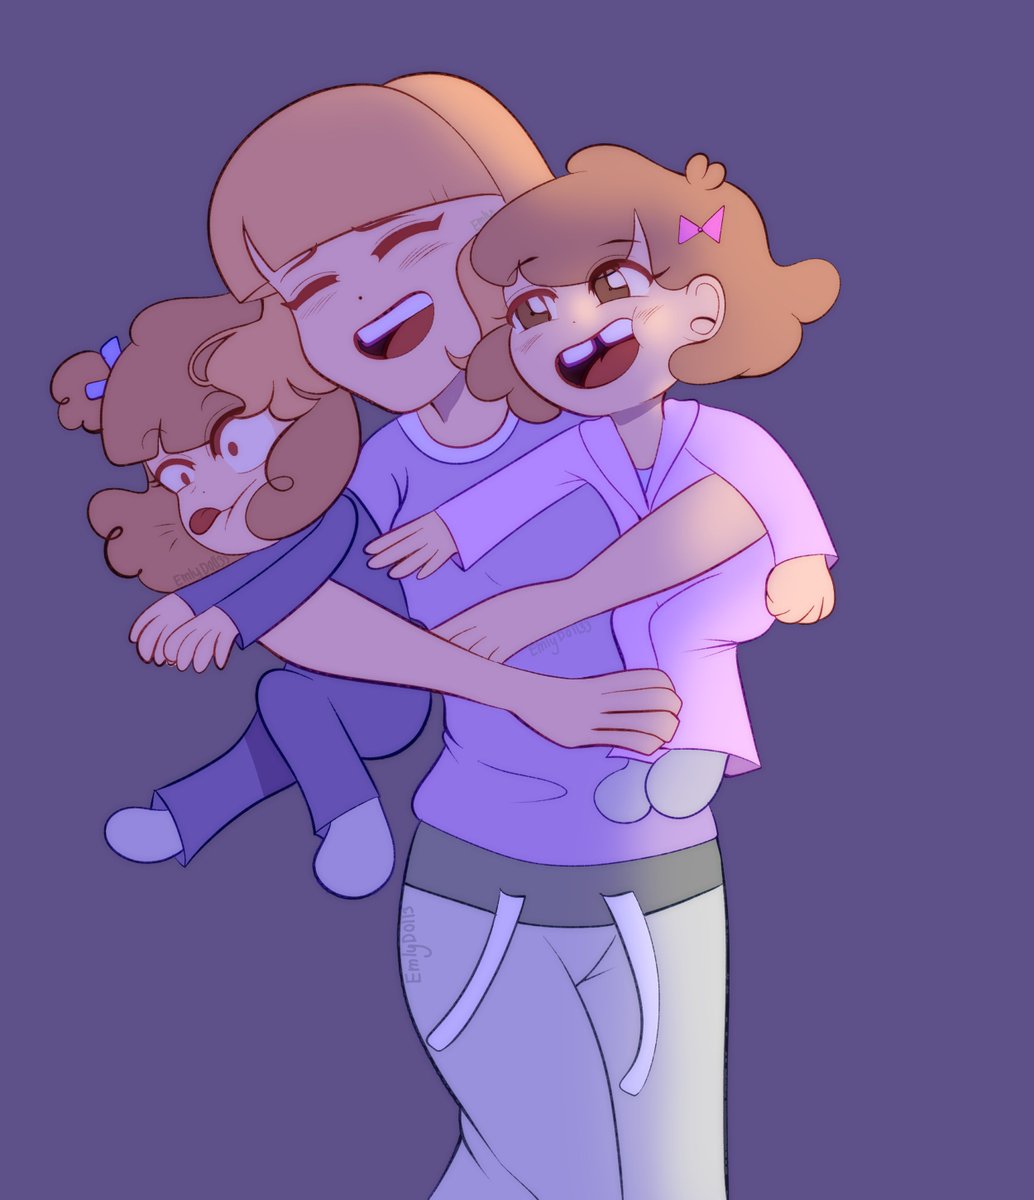 Heres Pacifica and her twins <3 

#Dipcifica #PacificaNorthwest #Dipperpines #Gravityfalls